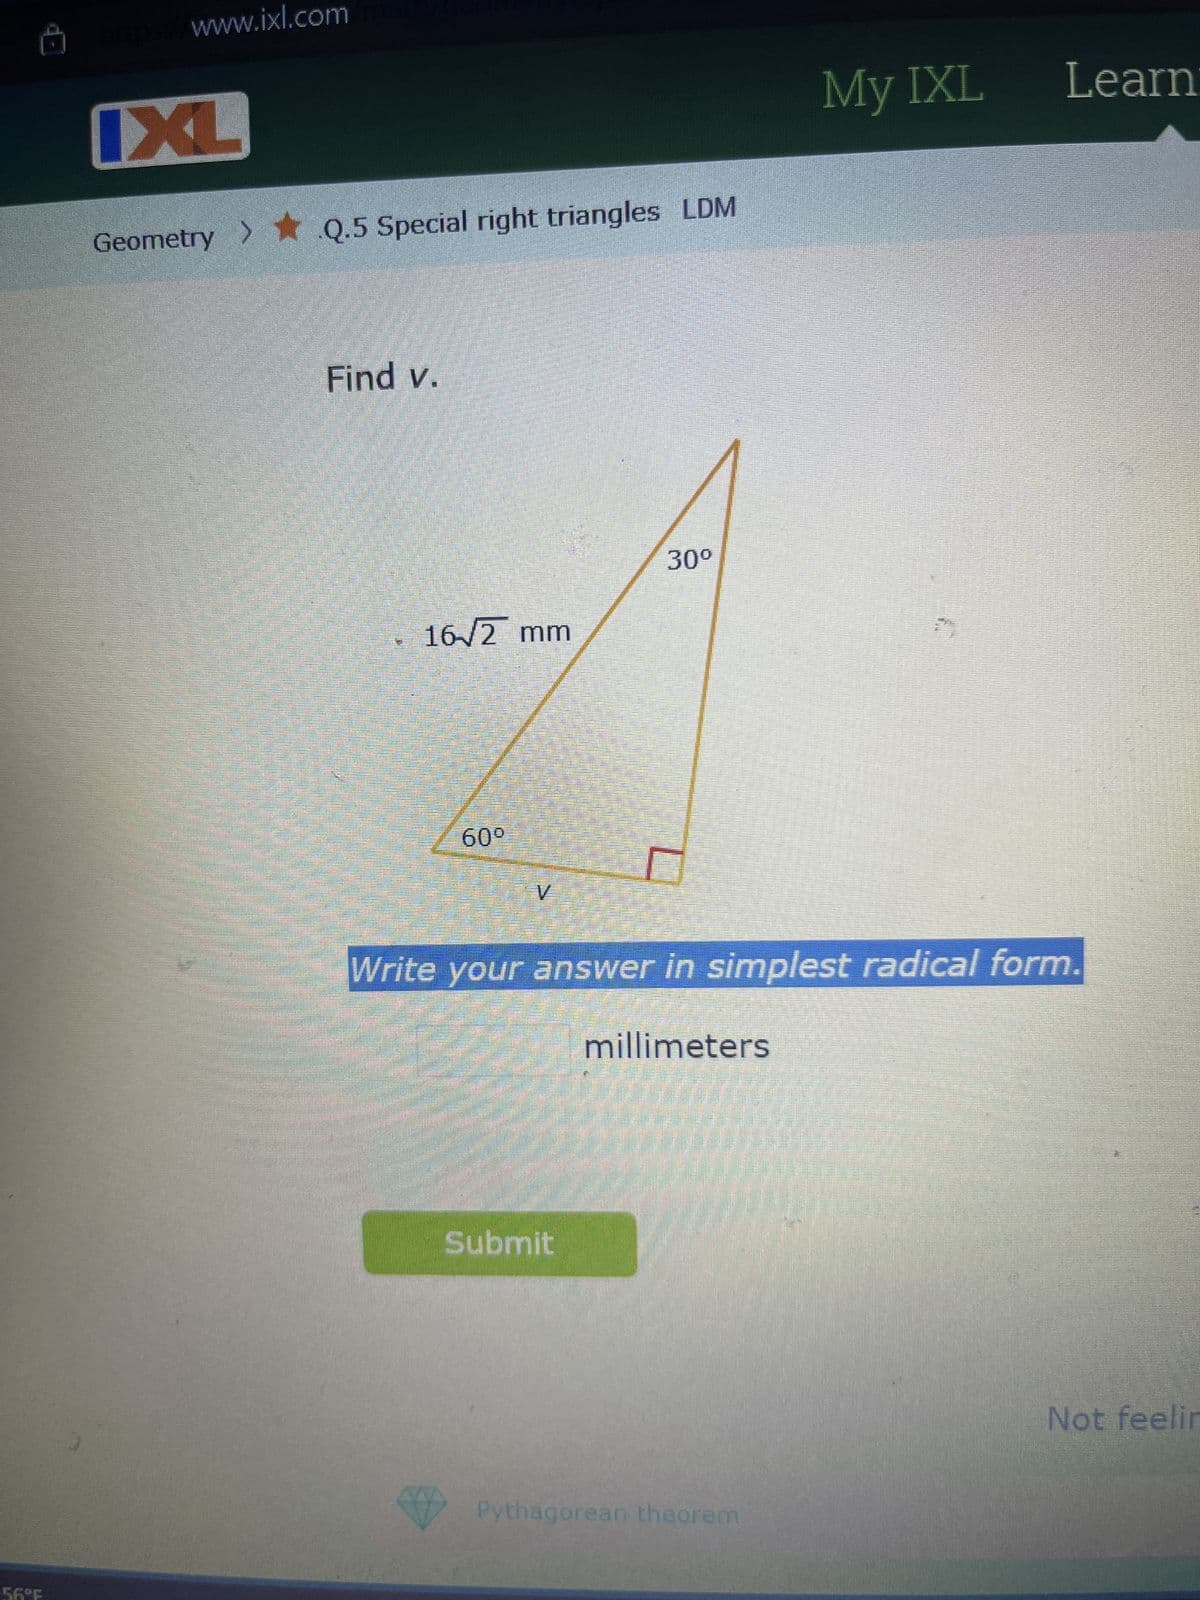 P
https://www.ixl.com
IXL
Geometry > Q.5 Special right triangles LDM
Find v.
16/2 mm
60°
V
30º
My IXL
Learn
Write your answer in simplest radical form.
millimeters
Submit
Pythagorean theorem
Not feelin